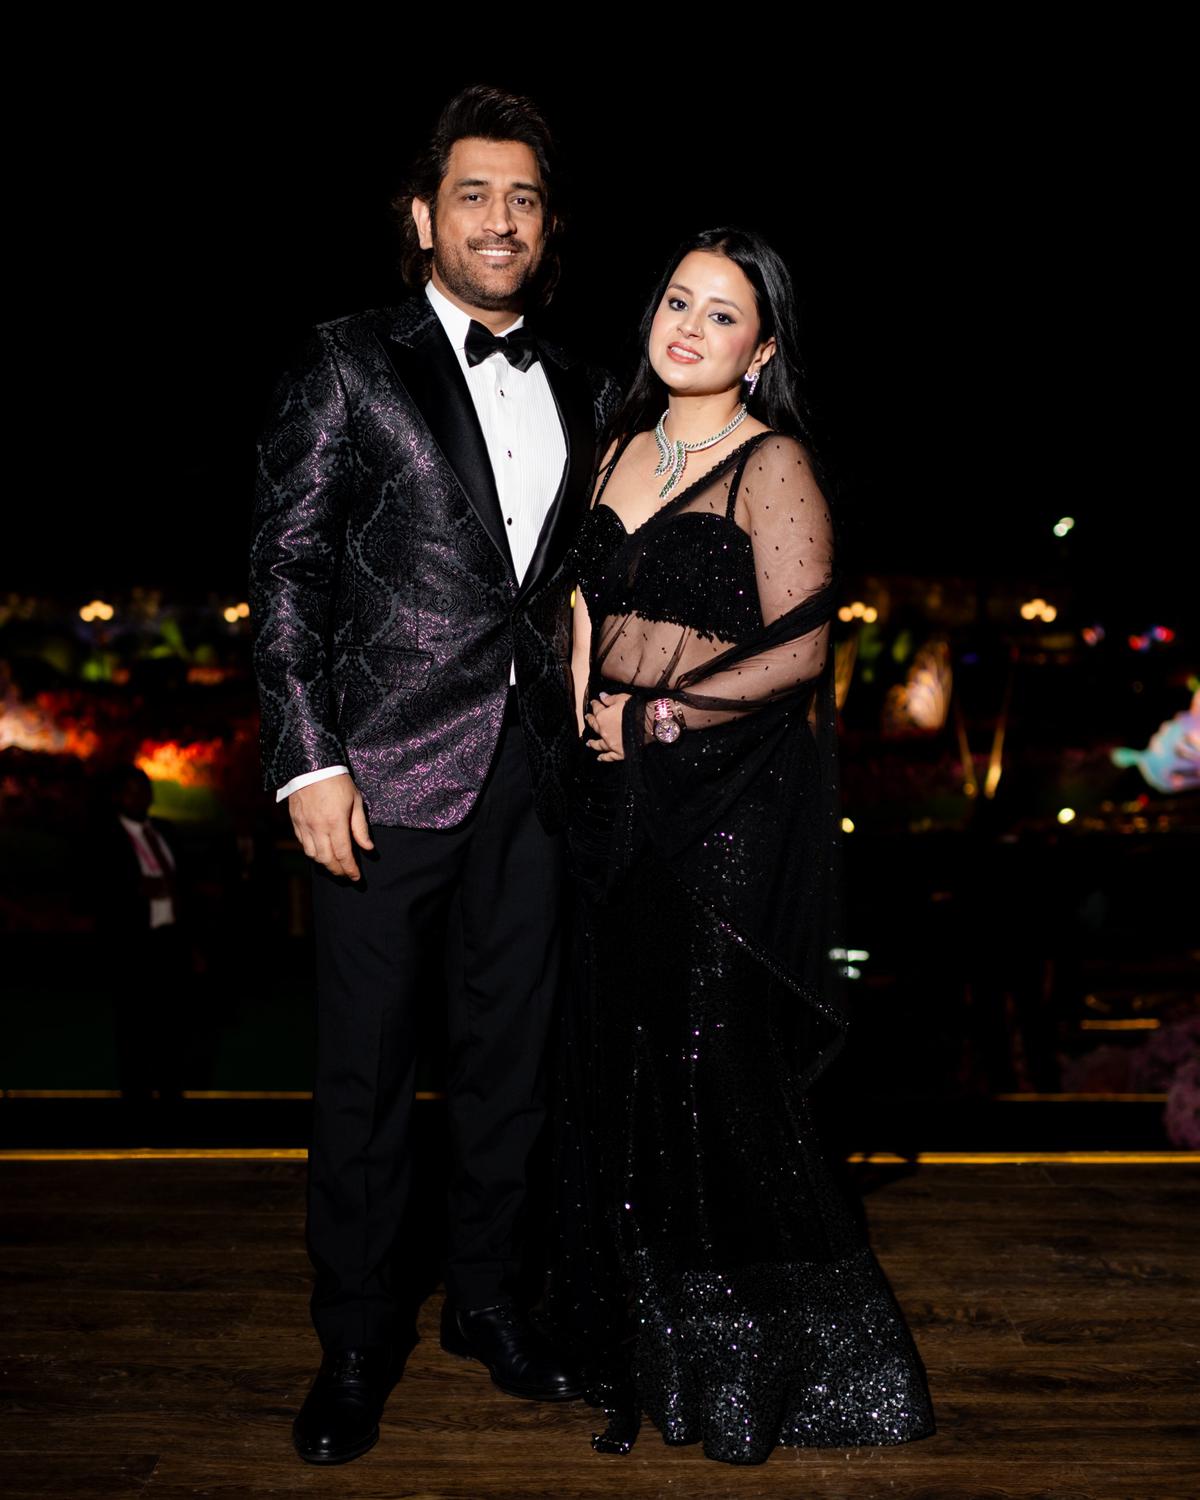 Former cricketer M S Dhoni and his wife Sakshi attend Anant Ambani and Radhika Marchant’s pre-wedding bash in Jamnagar